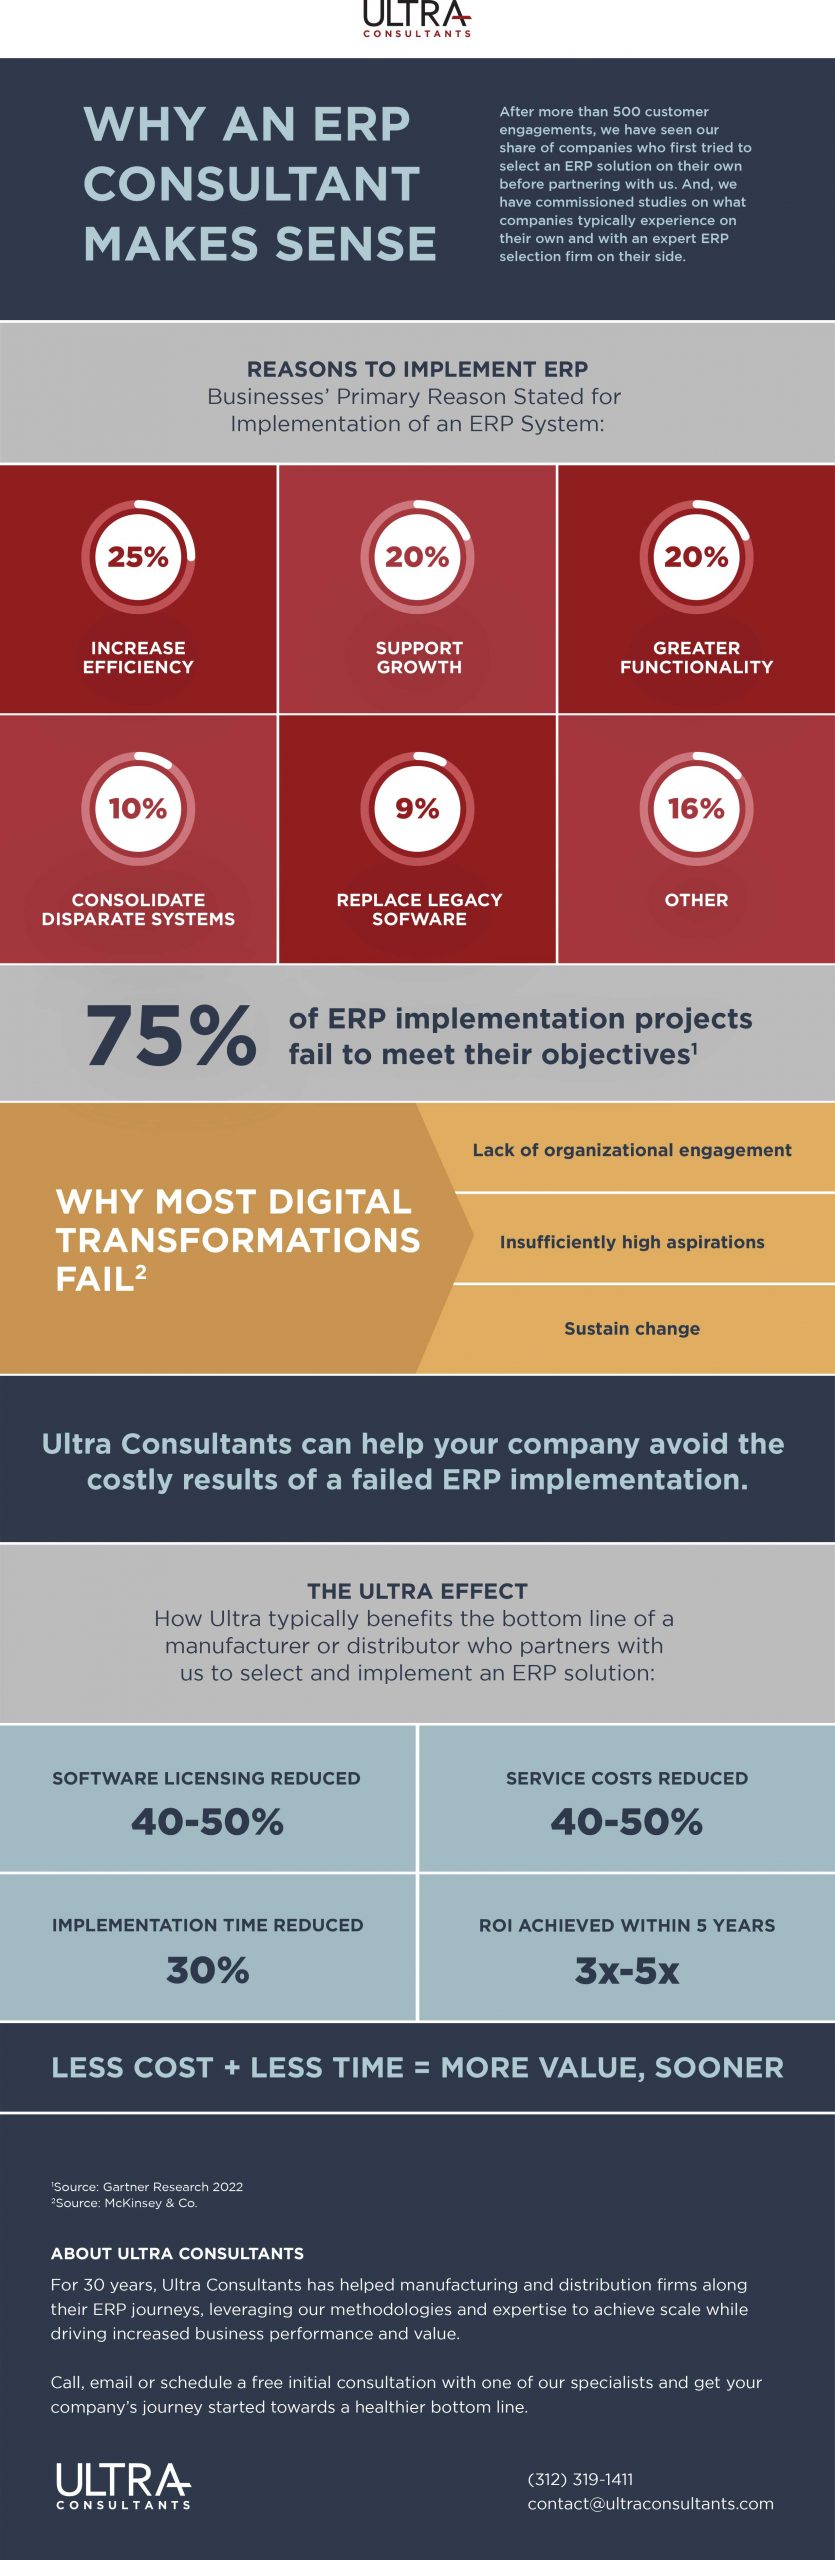 why an erp consultant makes sense infographic